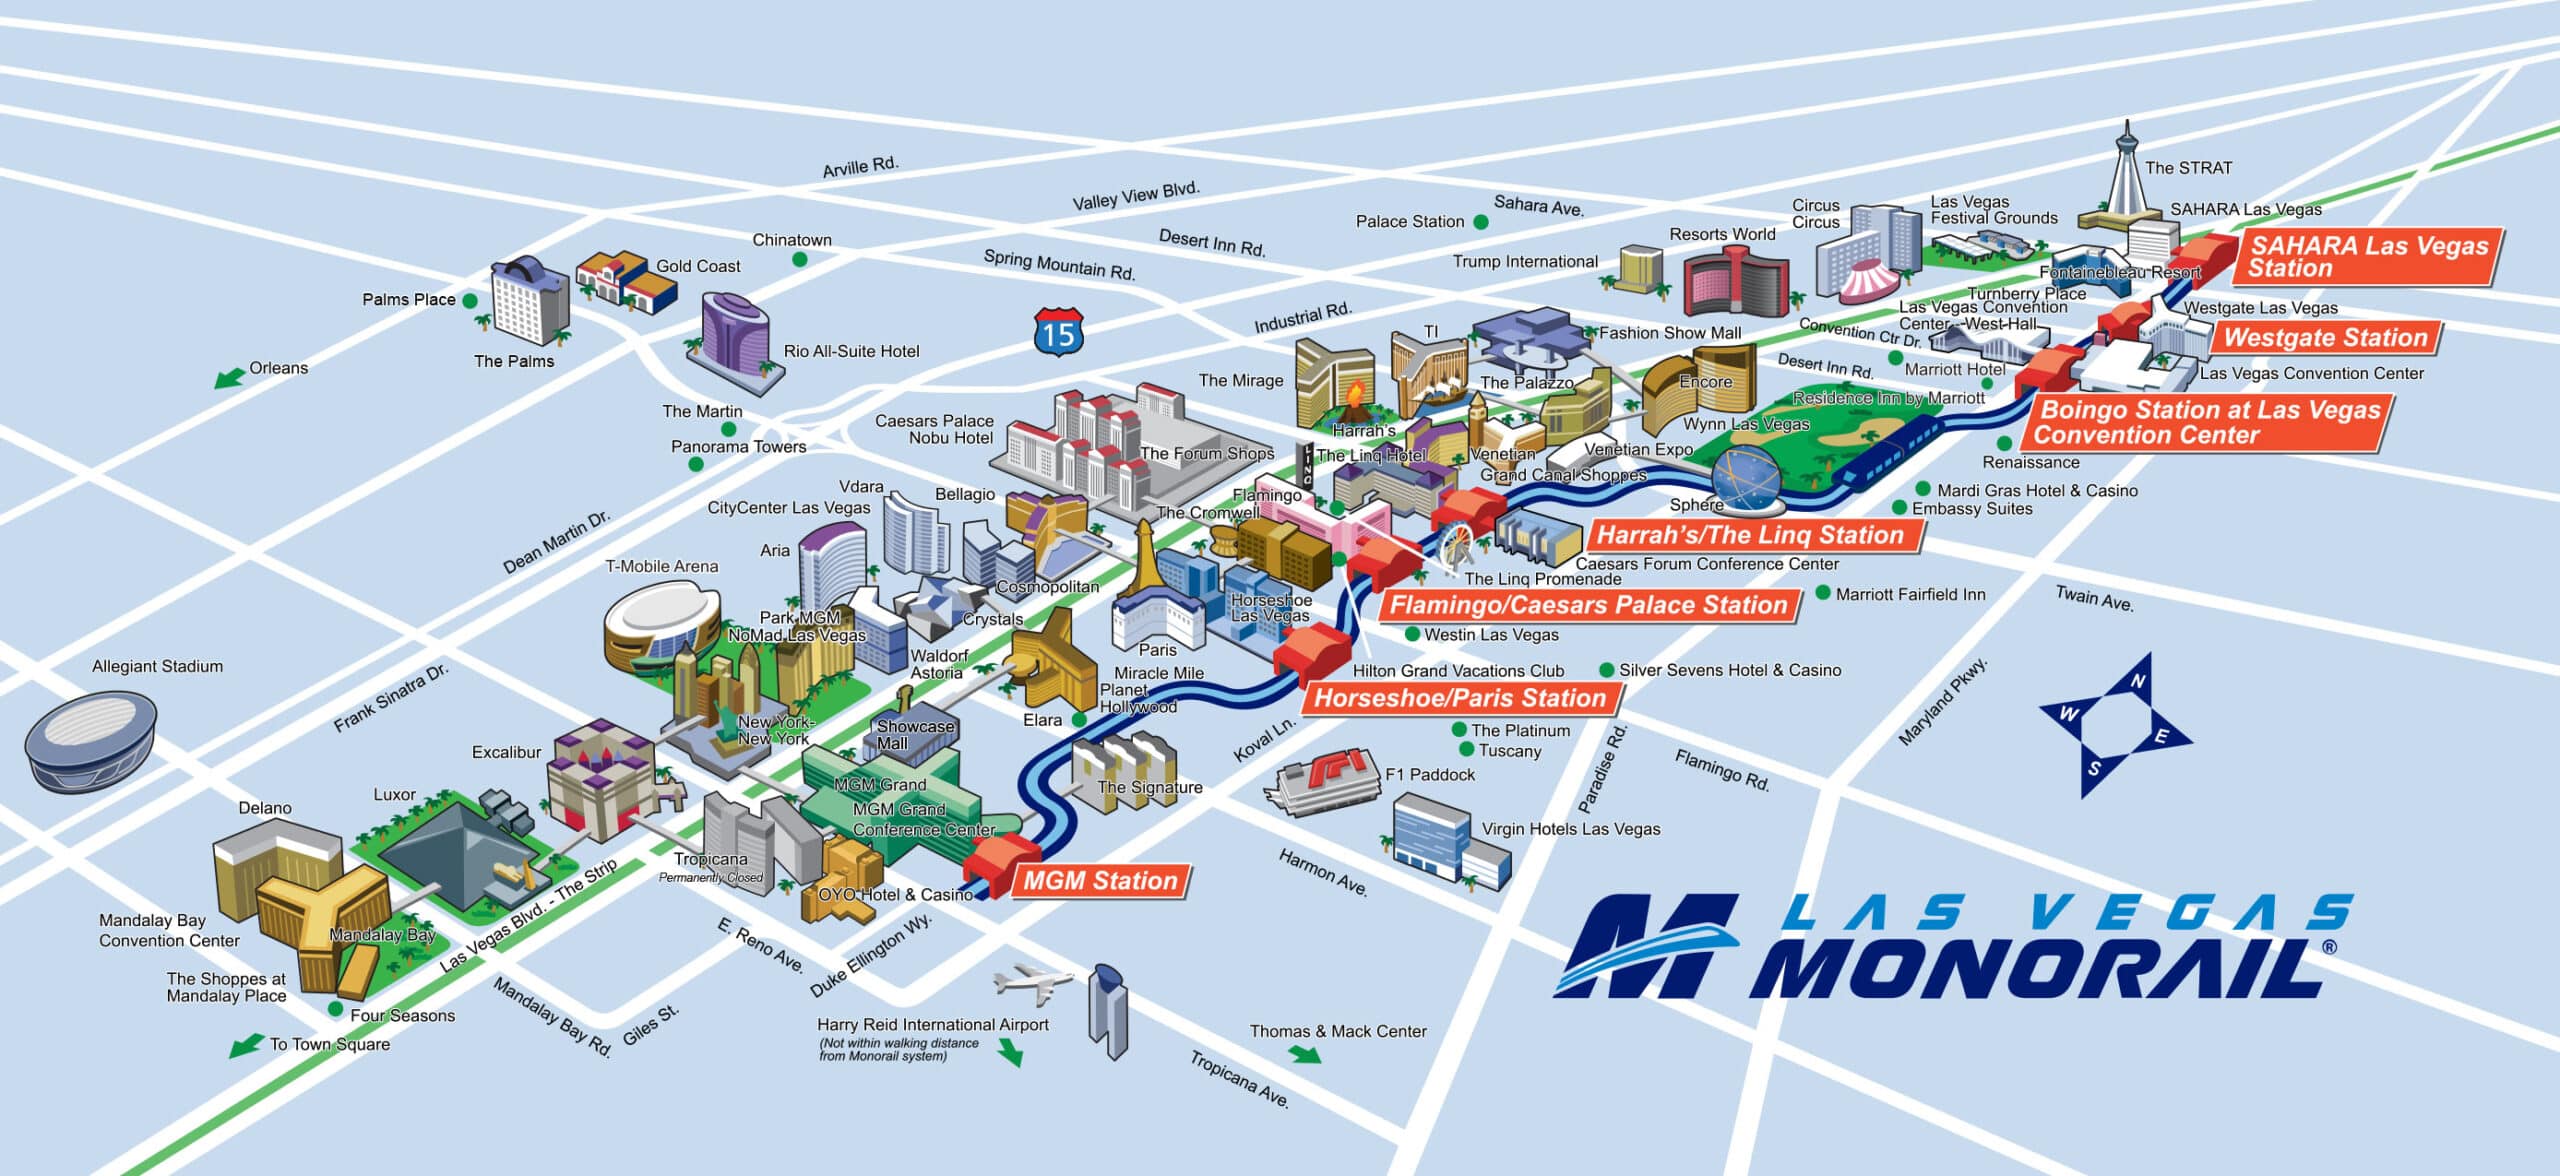 Map showing the route of the Las Vegas Monorail and the locations of major landmarks and hotels/casinos on the Las Vegas Strip.